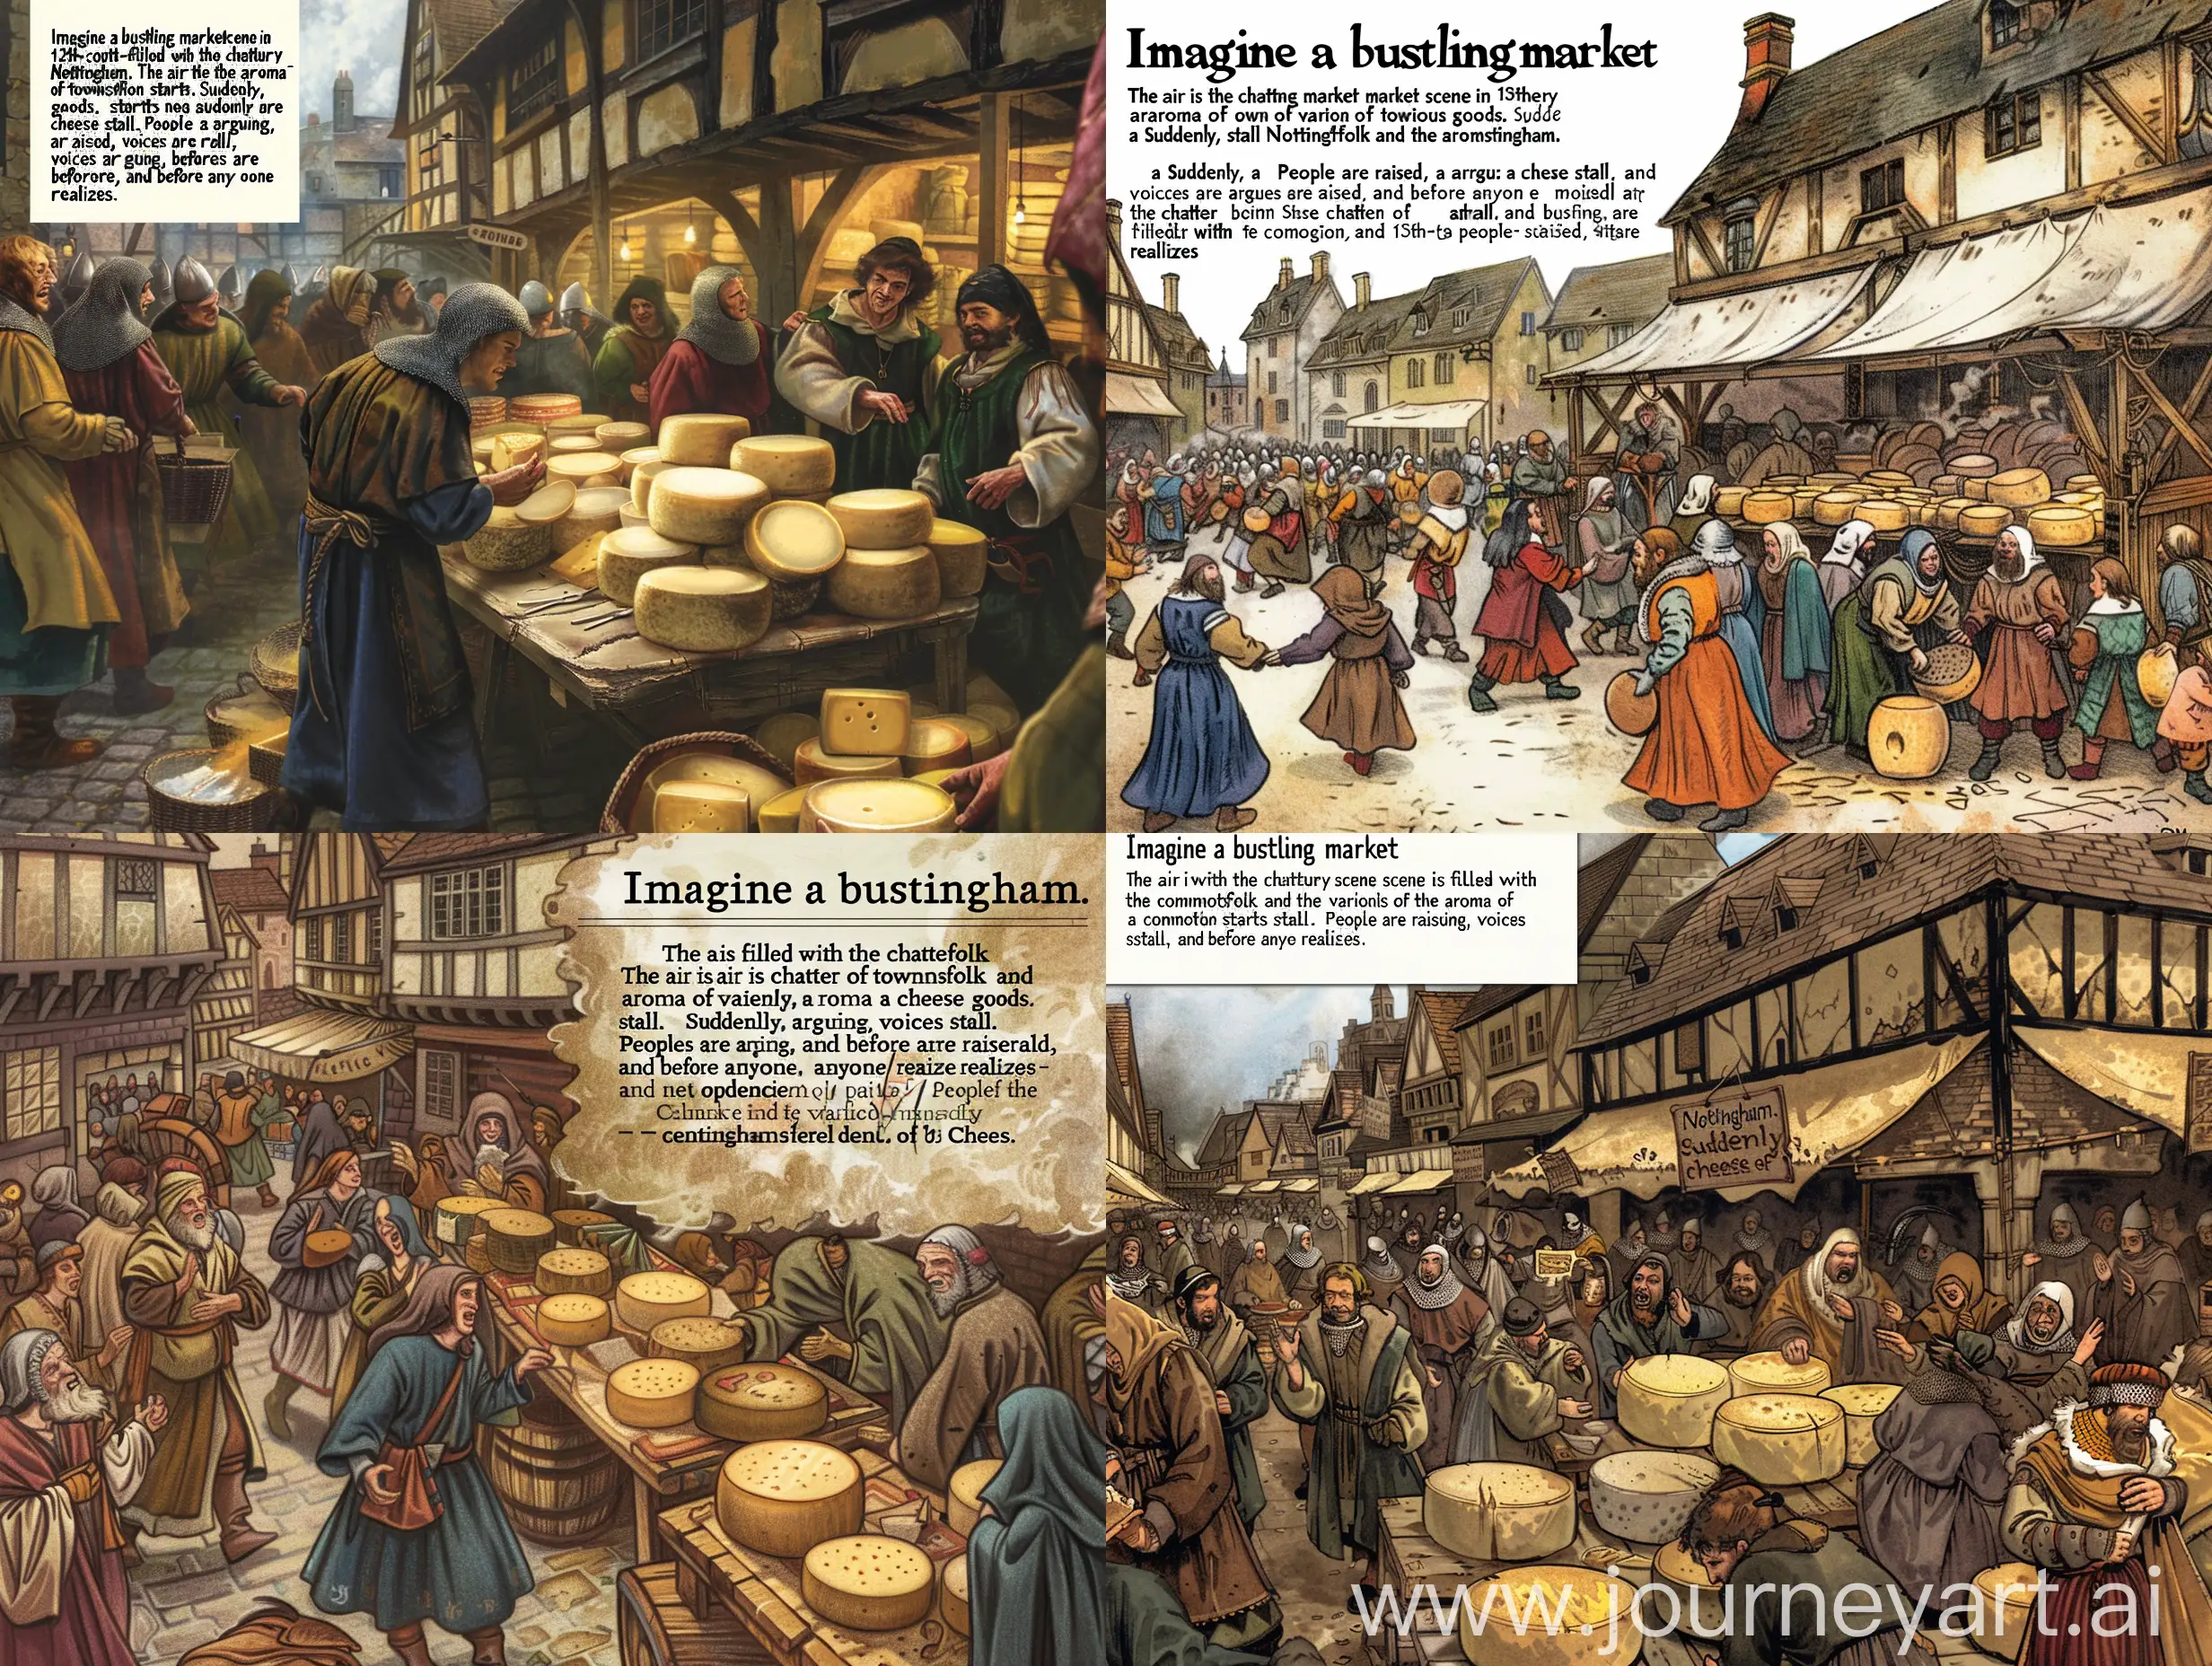 “Imagine a bustling market scene in 13th-century Nottingham. The air is filled with the chatter of townsfolk and the aroma of various goods. Suddenly, a commotion starts near a cheese stall. People are arguing, voices are raised, and before anyone realizes, a full-blown riot has started. People are scrambling, fighting over wheels of cheese. Describe the chaos, the characters involved, and how the situation escalates and eventually resolves.”